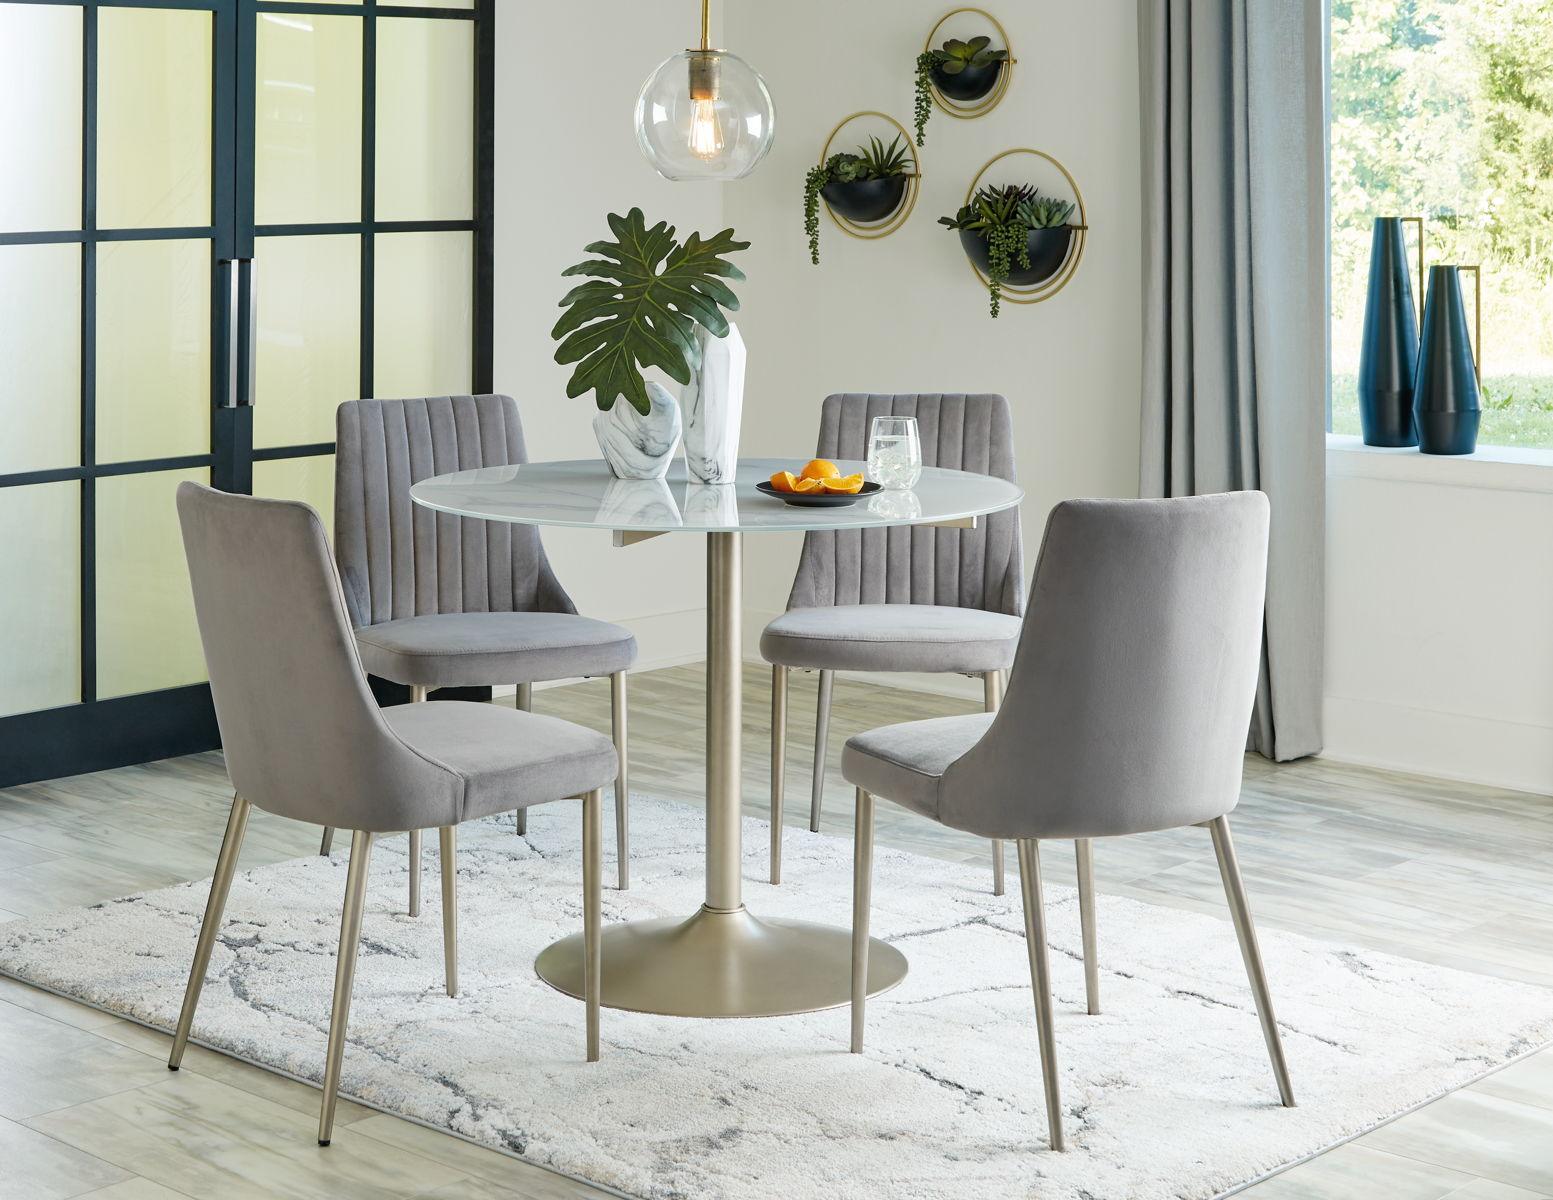 Signature Design by Ashley® - Barchoni - White / Gray - 5 Pc. - Dining Room Table, 4 Side Chairs - 5th Avenue Furniture